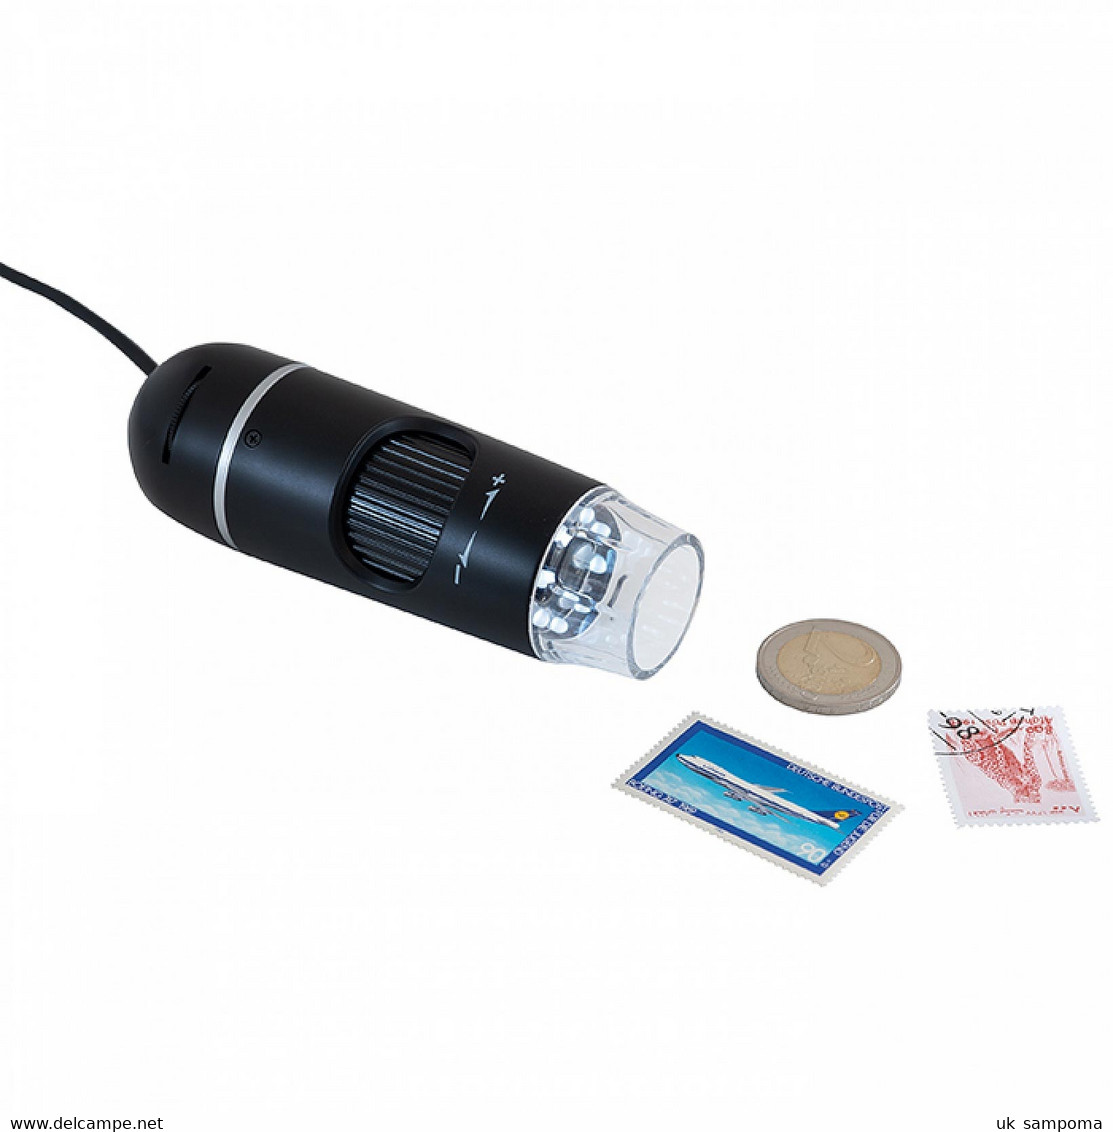 USB Digital Microscope DM6, Features A 10x To 300x Magnification - Pinzetten, Lupen, Mikroskope